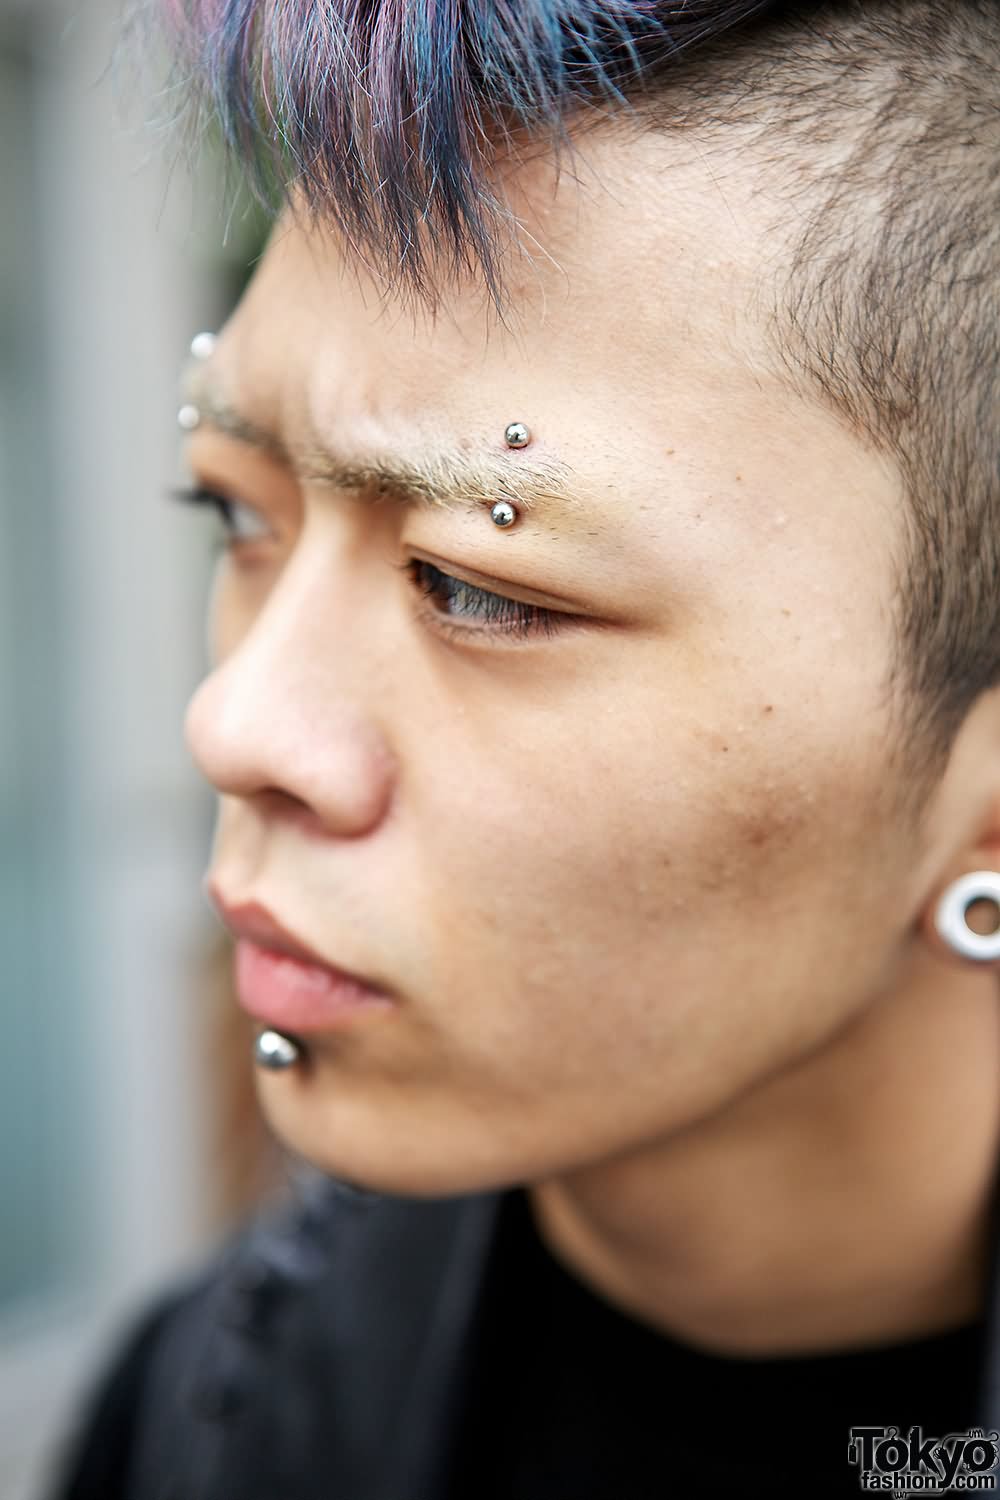 Labret And Eyebrow Piercing